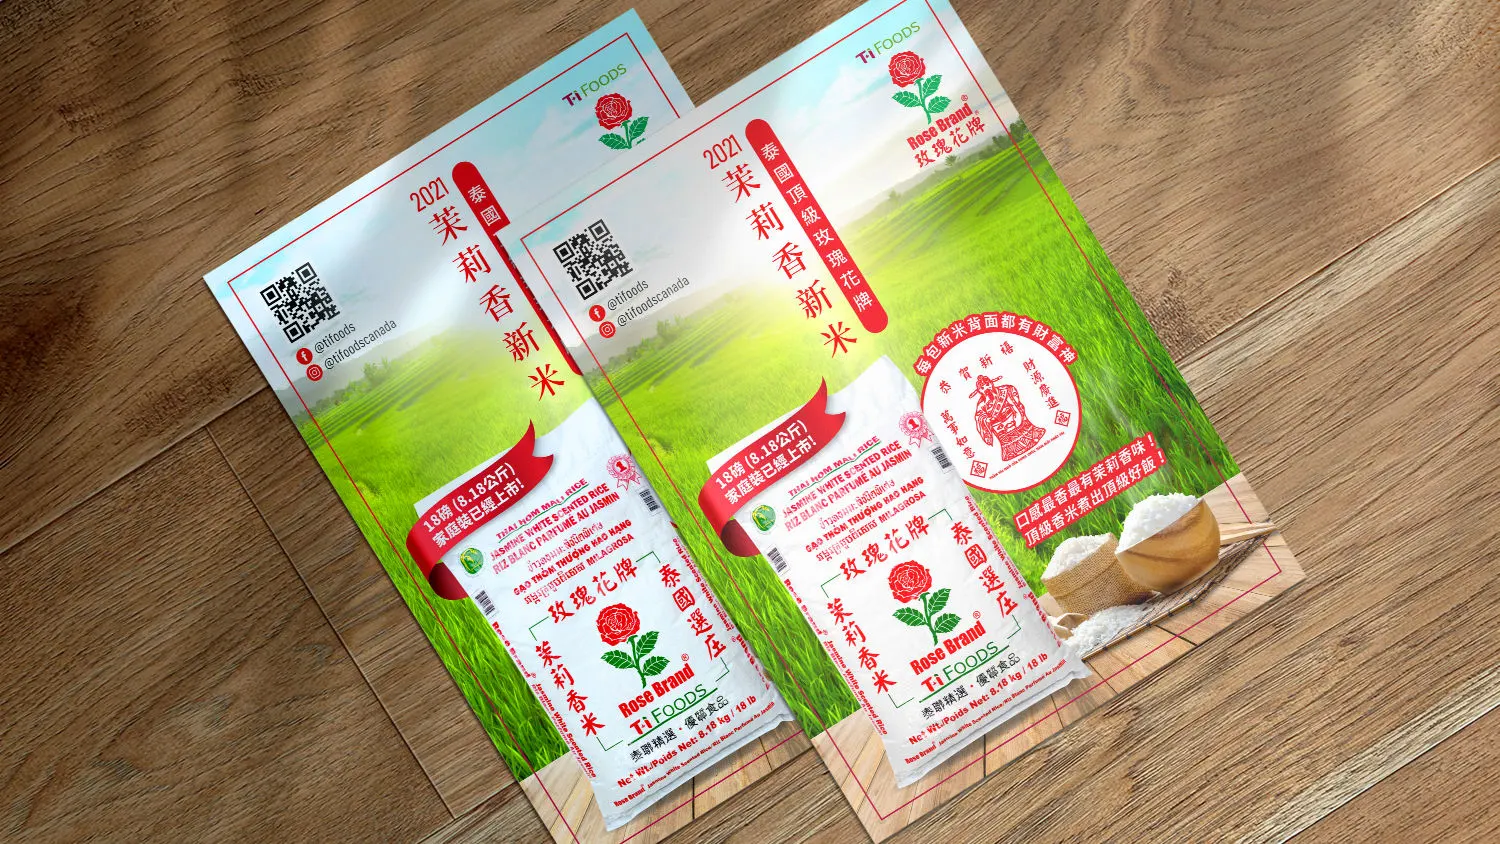 Graphic design project for TI Foods 泰聯貿易. Designed posters of product promotion